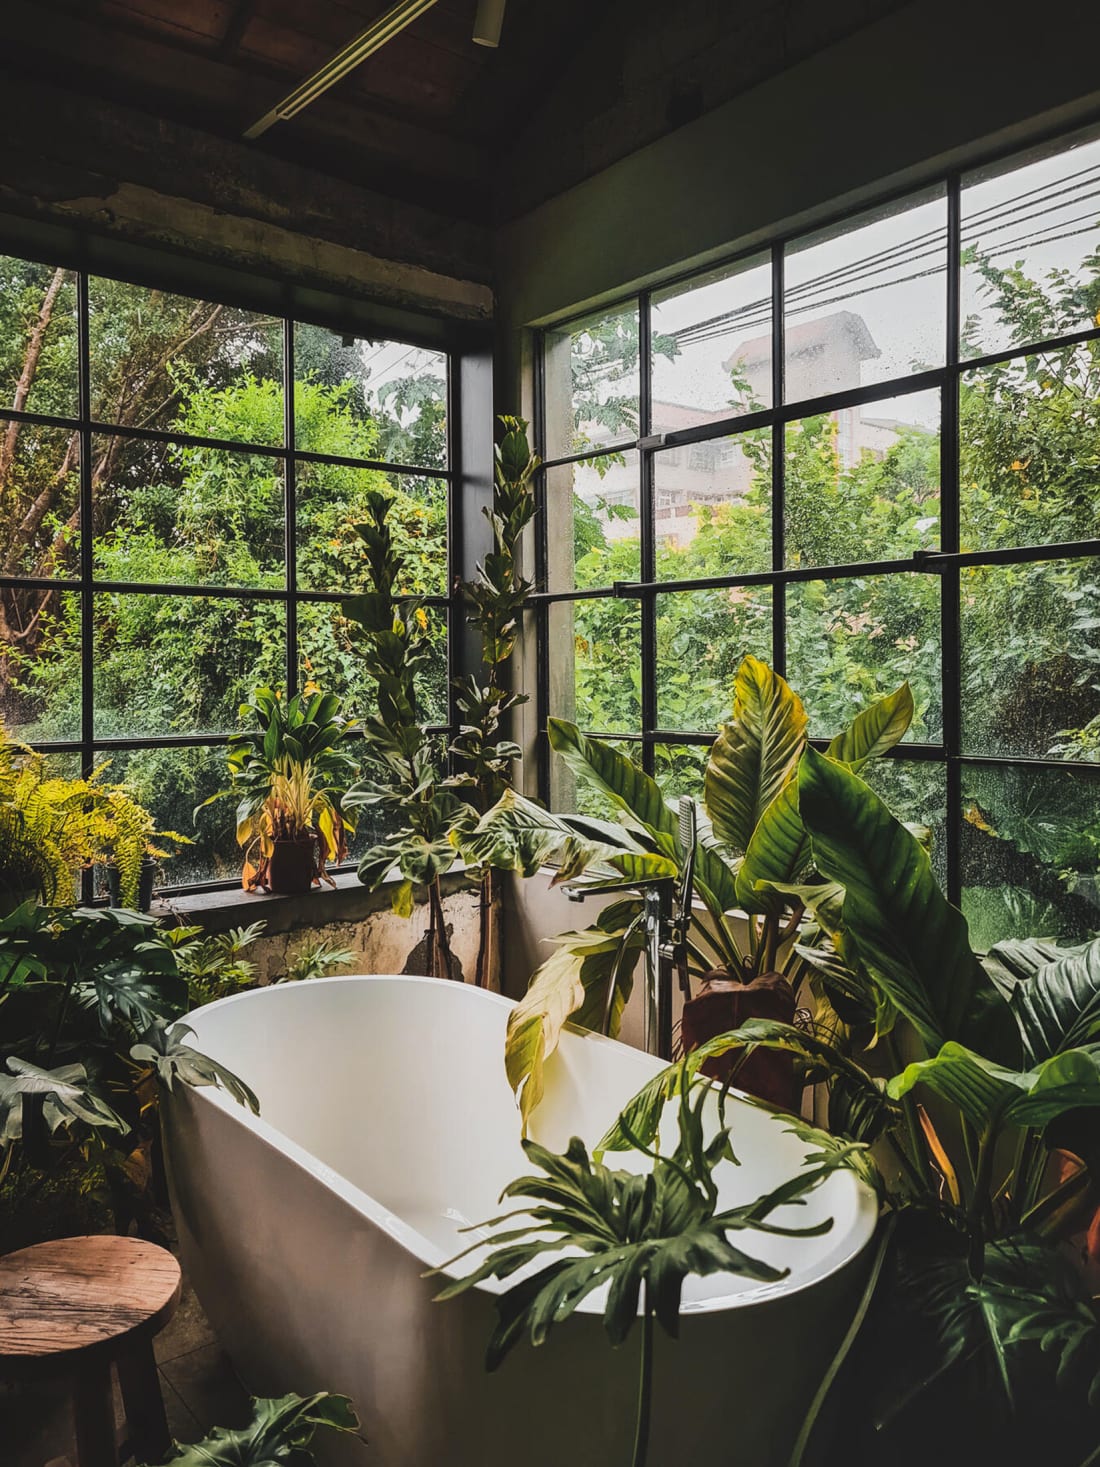 Photographer Yu Tzu Chins image of a lush, plant-filled bathroom in Taipei,